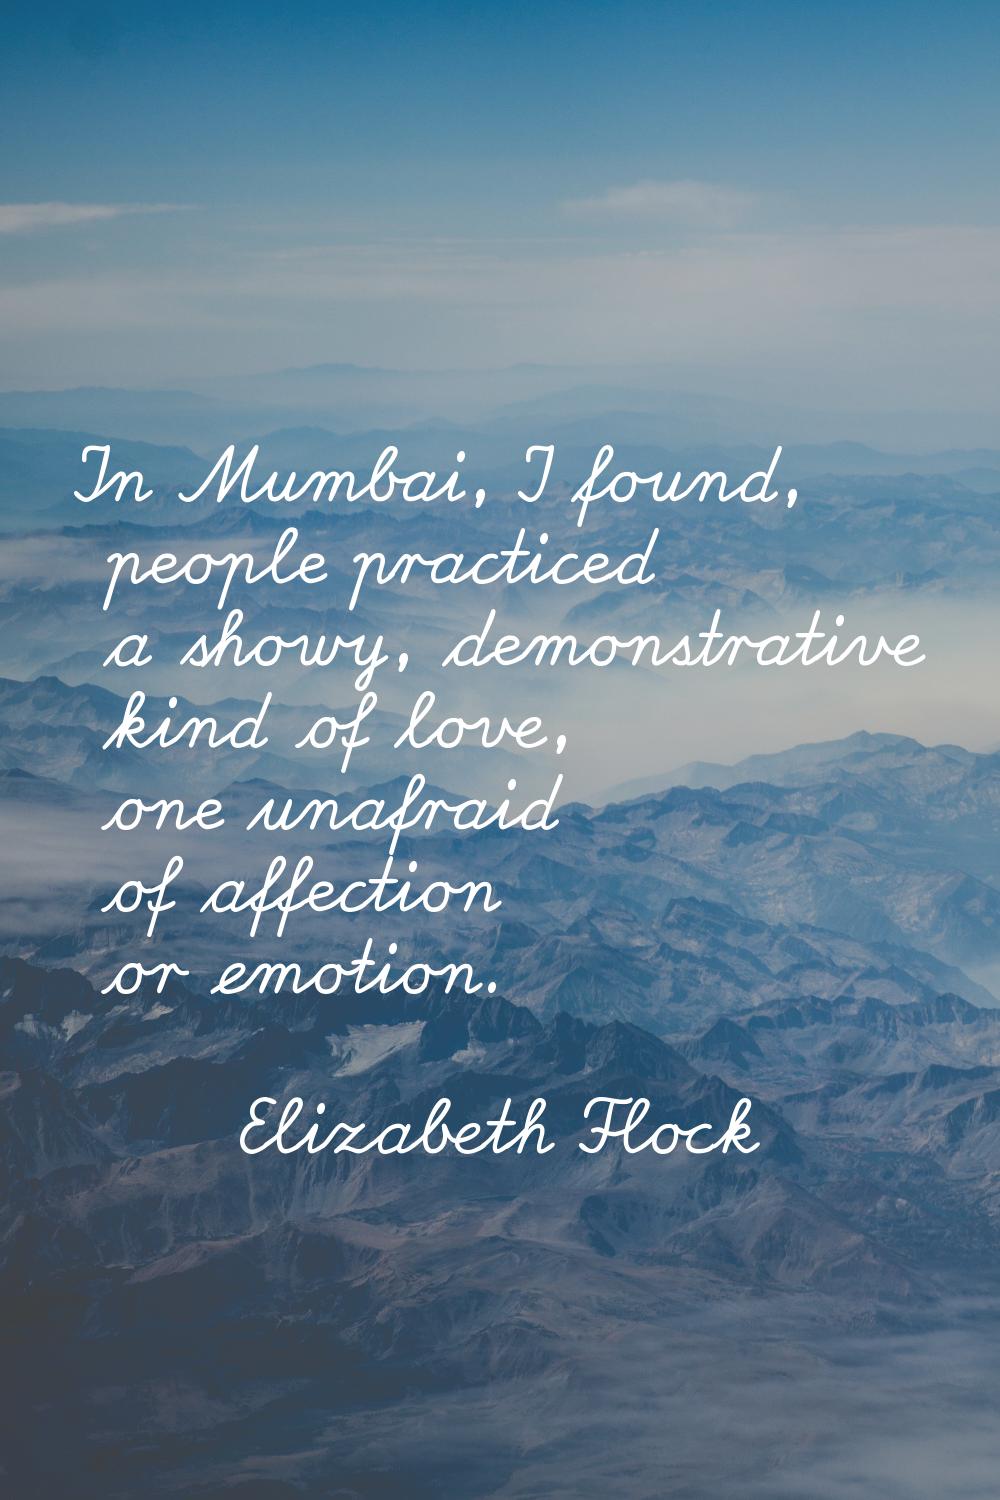 In Mumbai, I found, people practiced a showy, demonstrative kind of love, one unafraid of affection